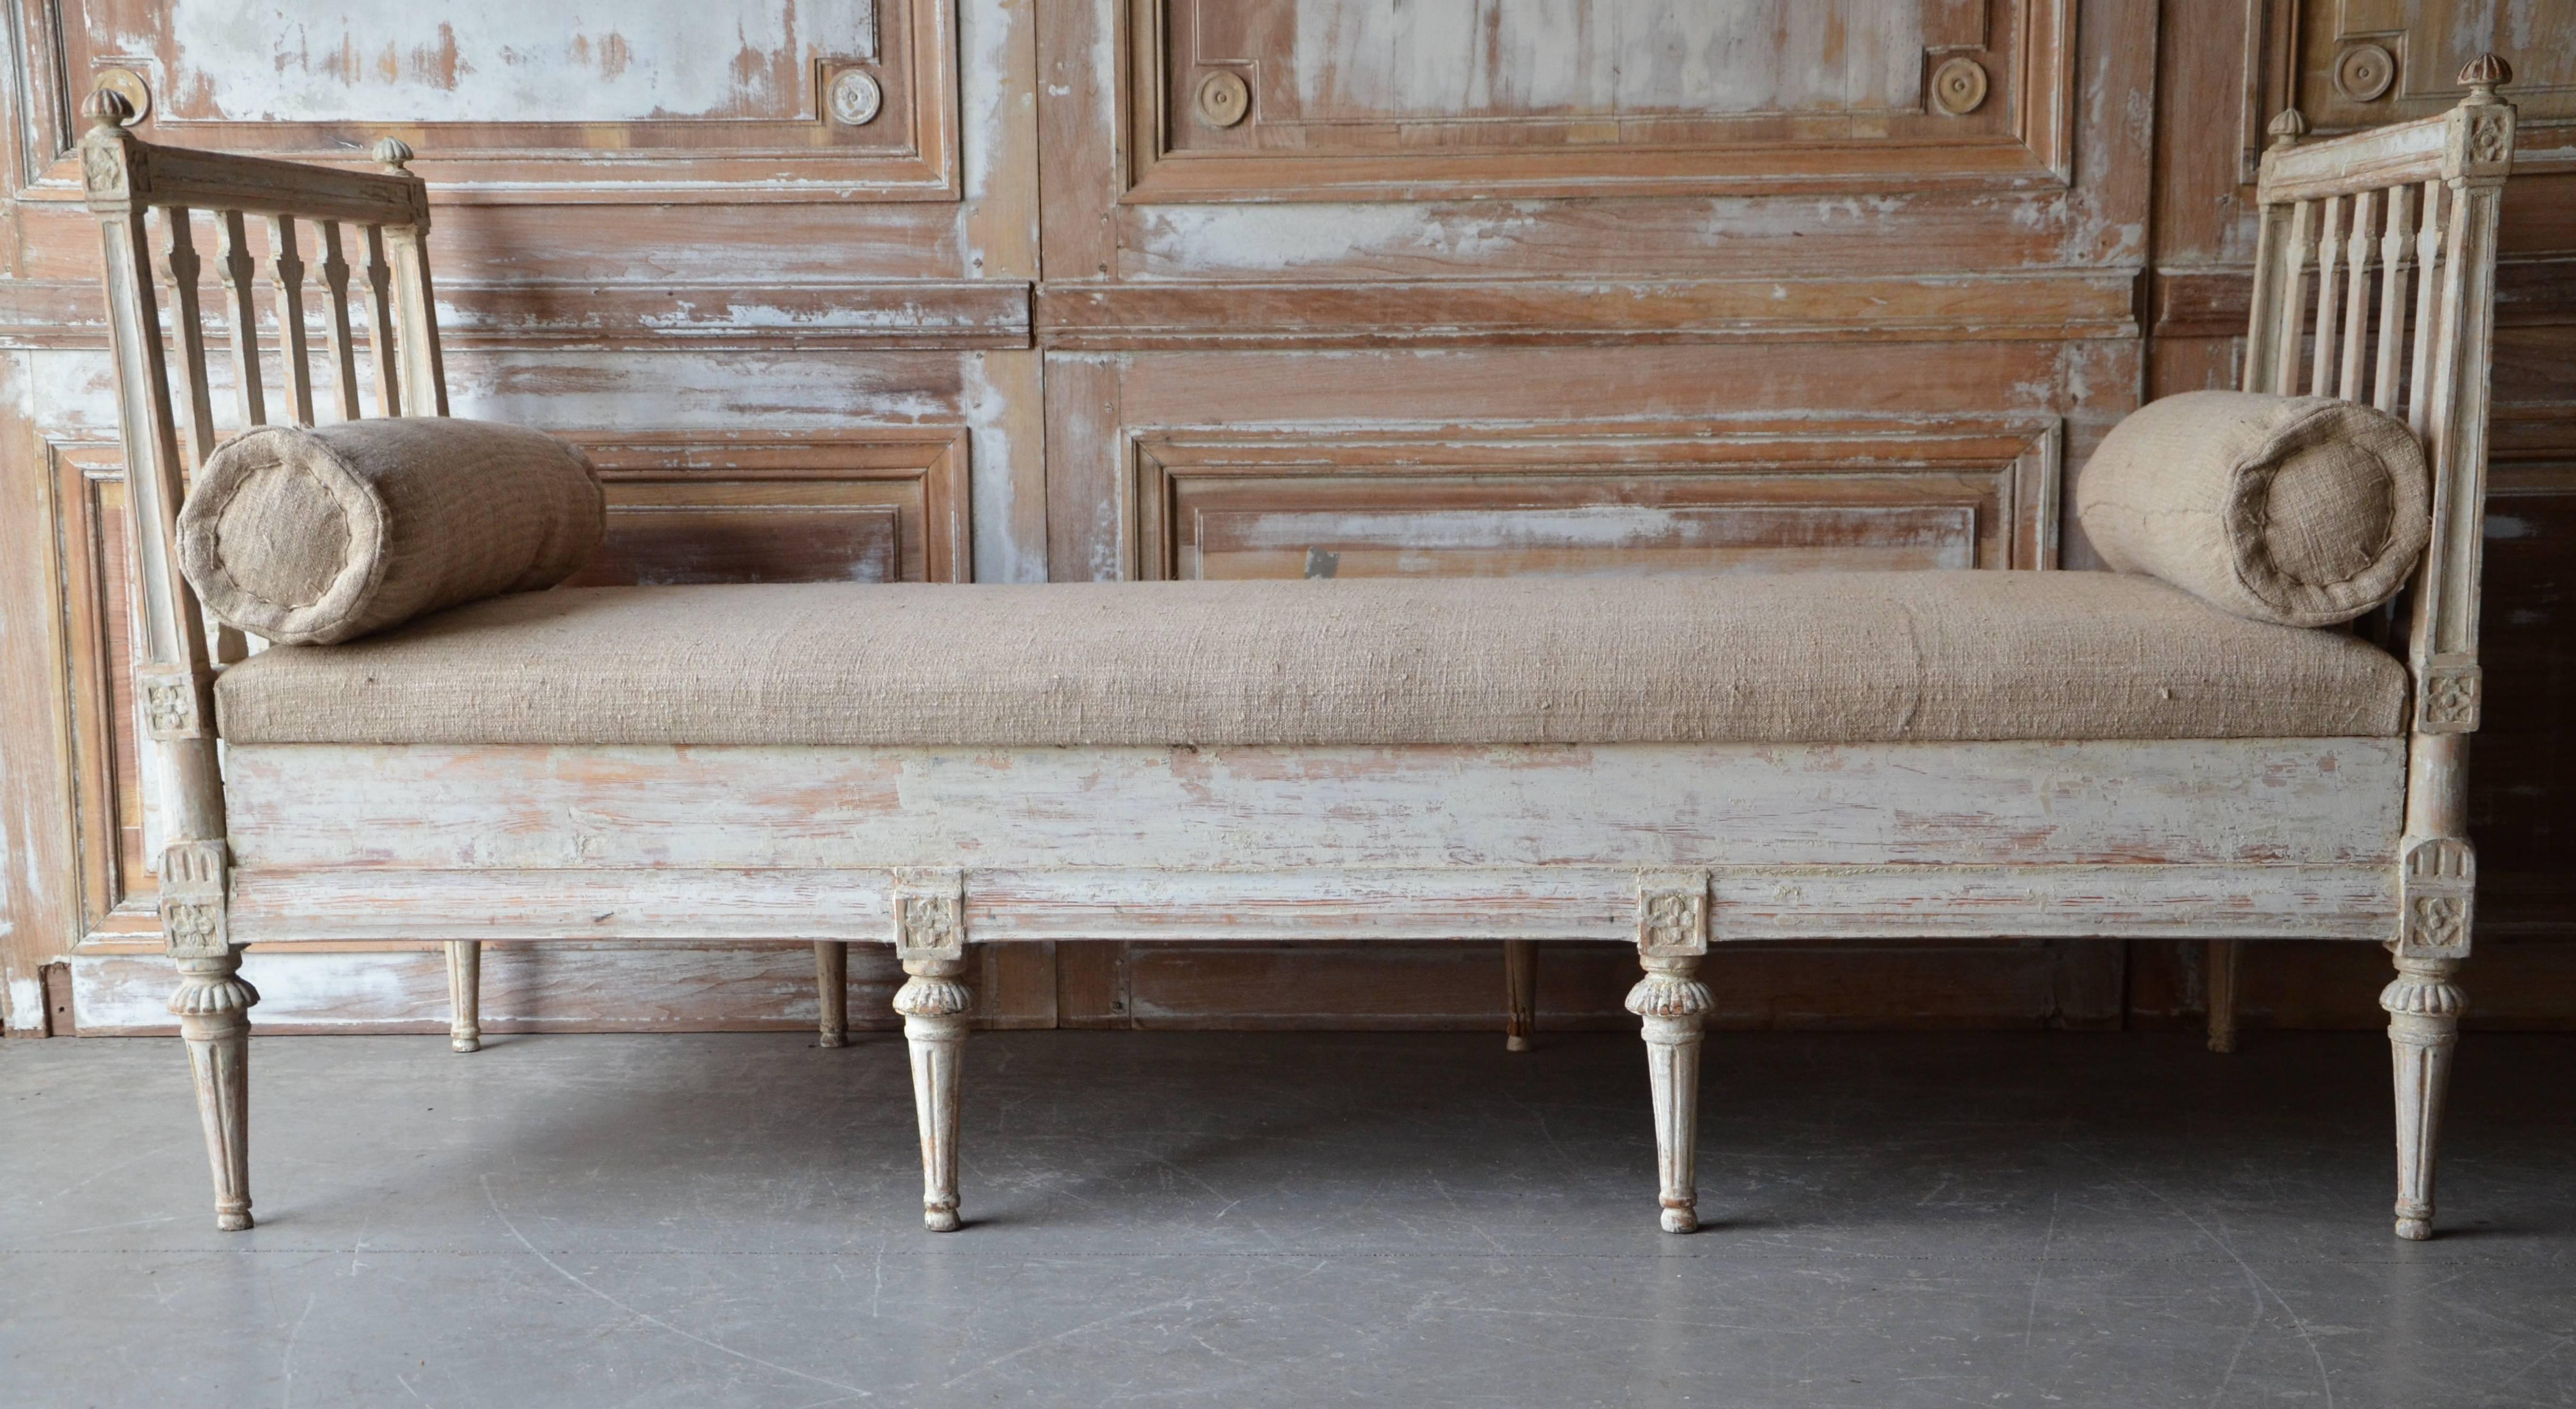 
Late 18th century richly carved Swedish Gustavian daybed has a special seat; its a covered wooden seat. It's a trunk feeling when you open it.
The irons on the side are original and typical for that period 1790-1800.
We always love it when they